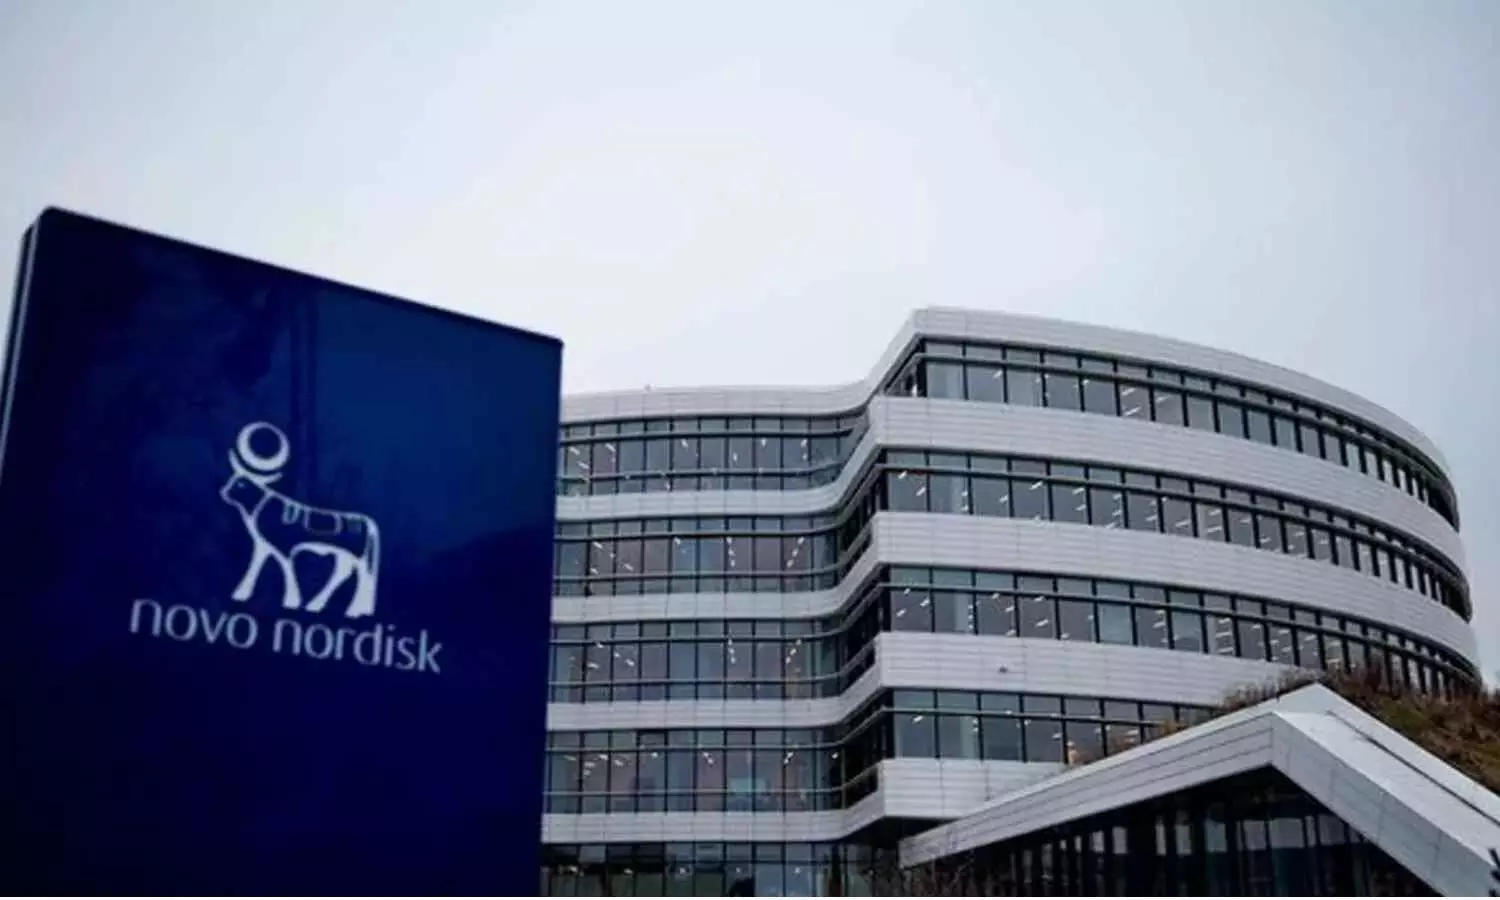 Continue CT with 30 ongoing Indian subjects: CDSCO panel tells Novo-Nordisk on Insulin Icodec